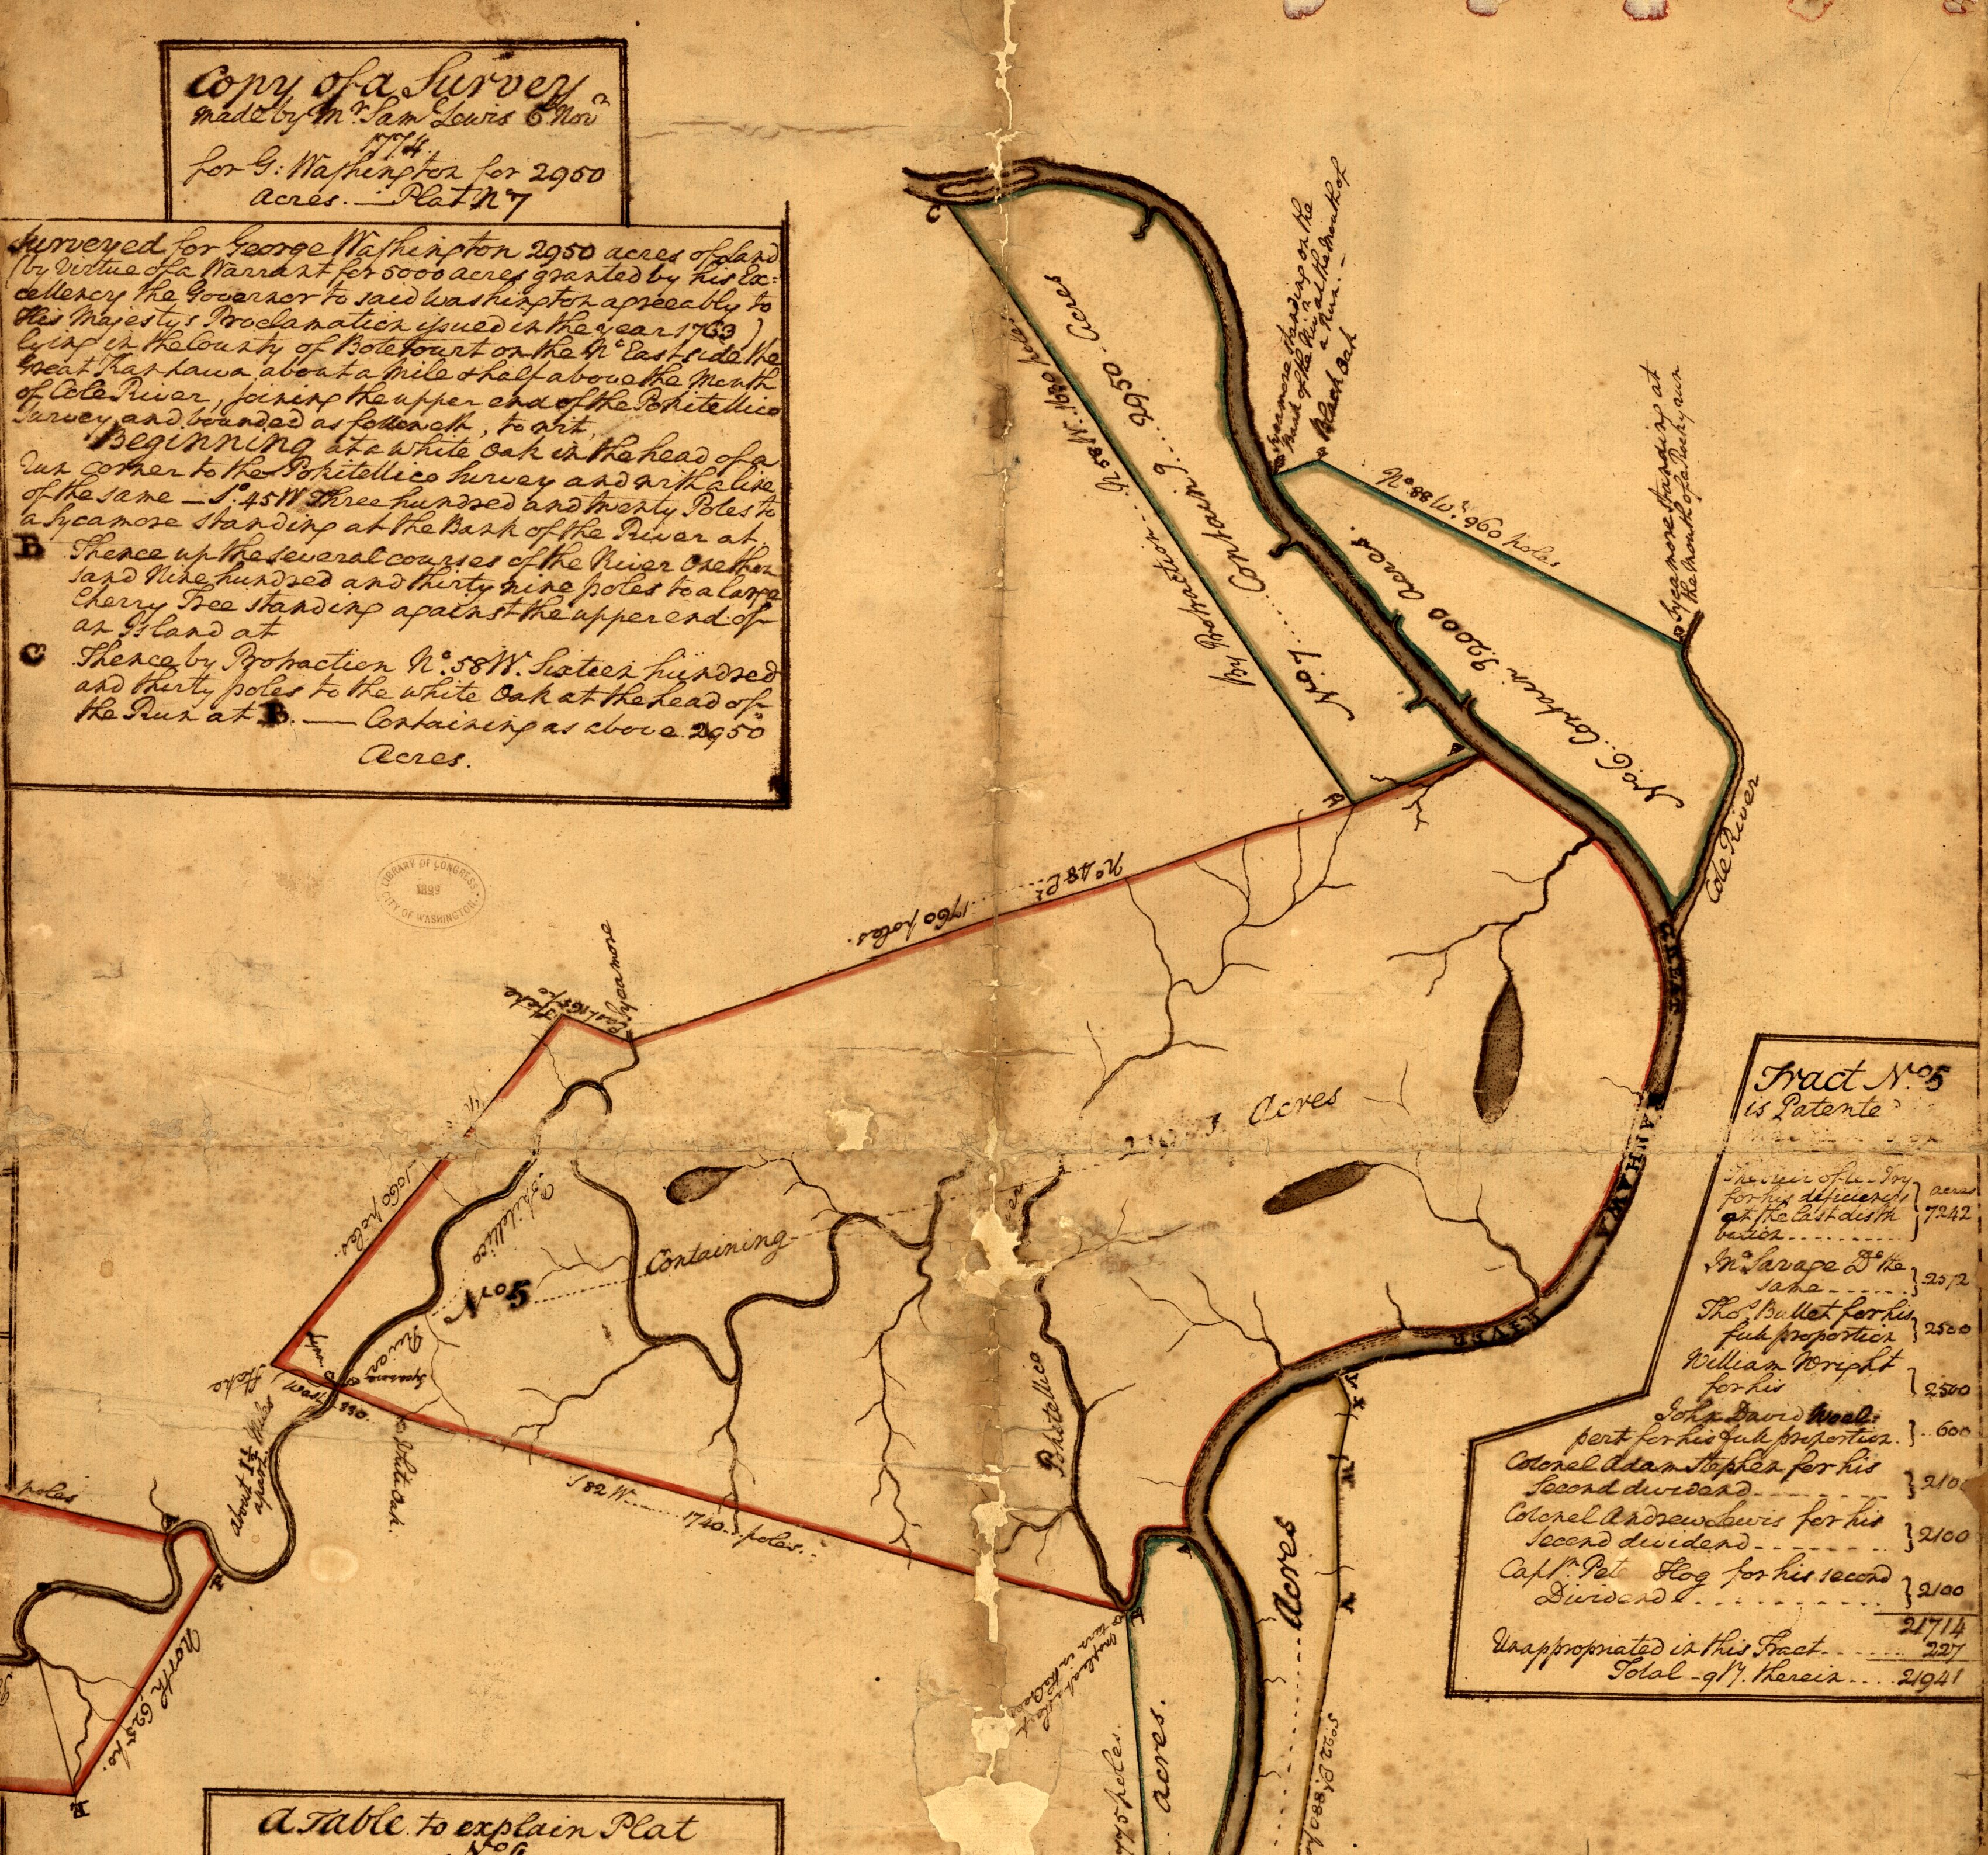 A map showing a land survey along the Kanawha River in West Virginia. The river snakes through the middle of the map, with various divisions of land on either side labeled and measured in acreage.